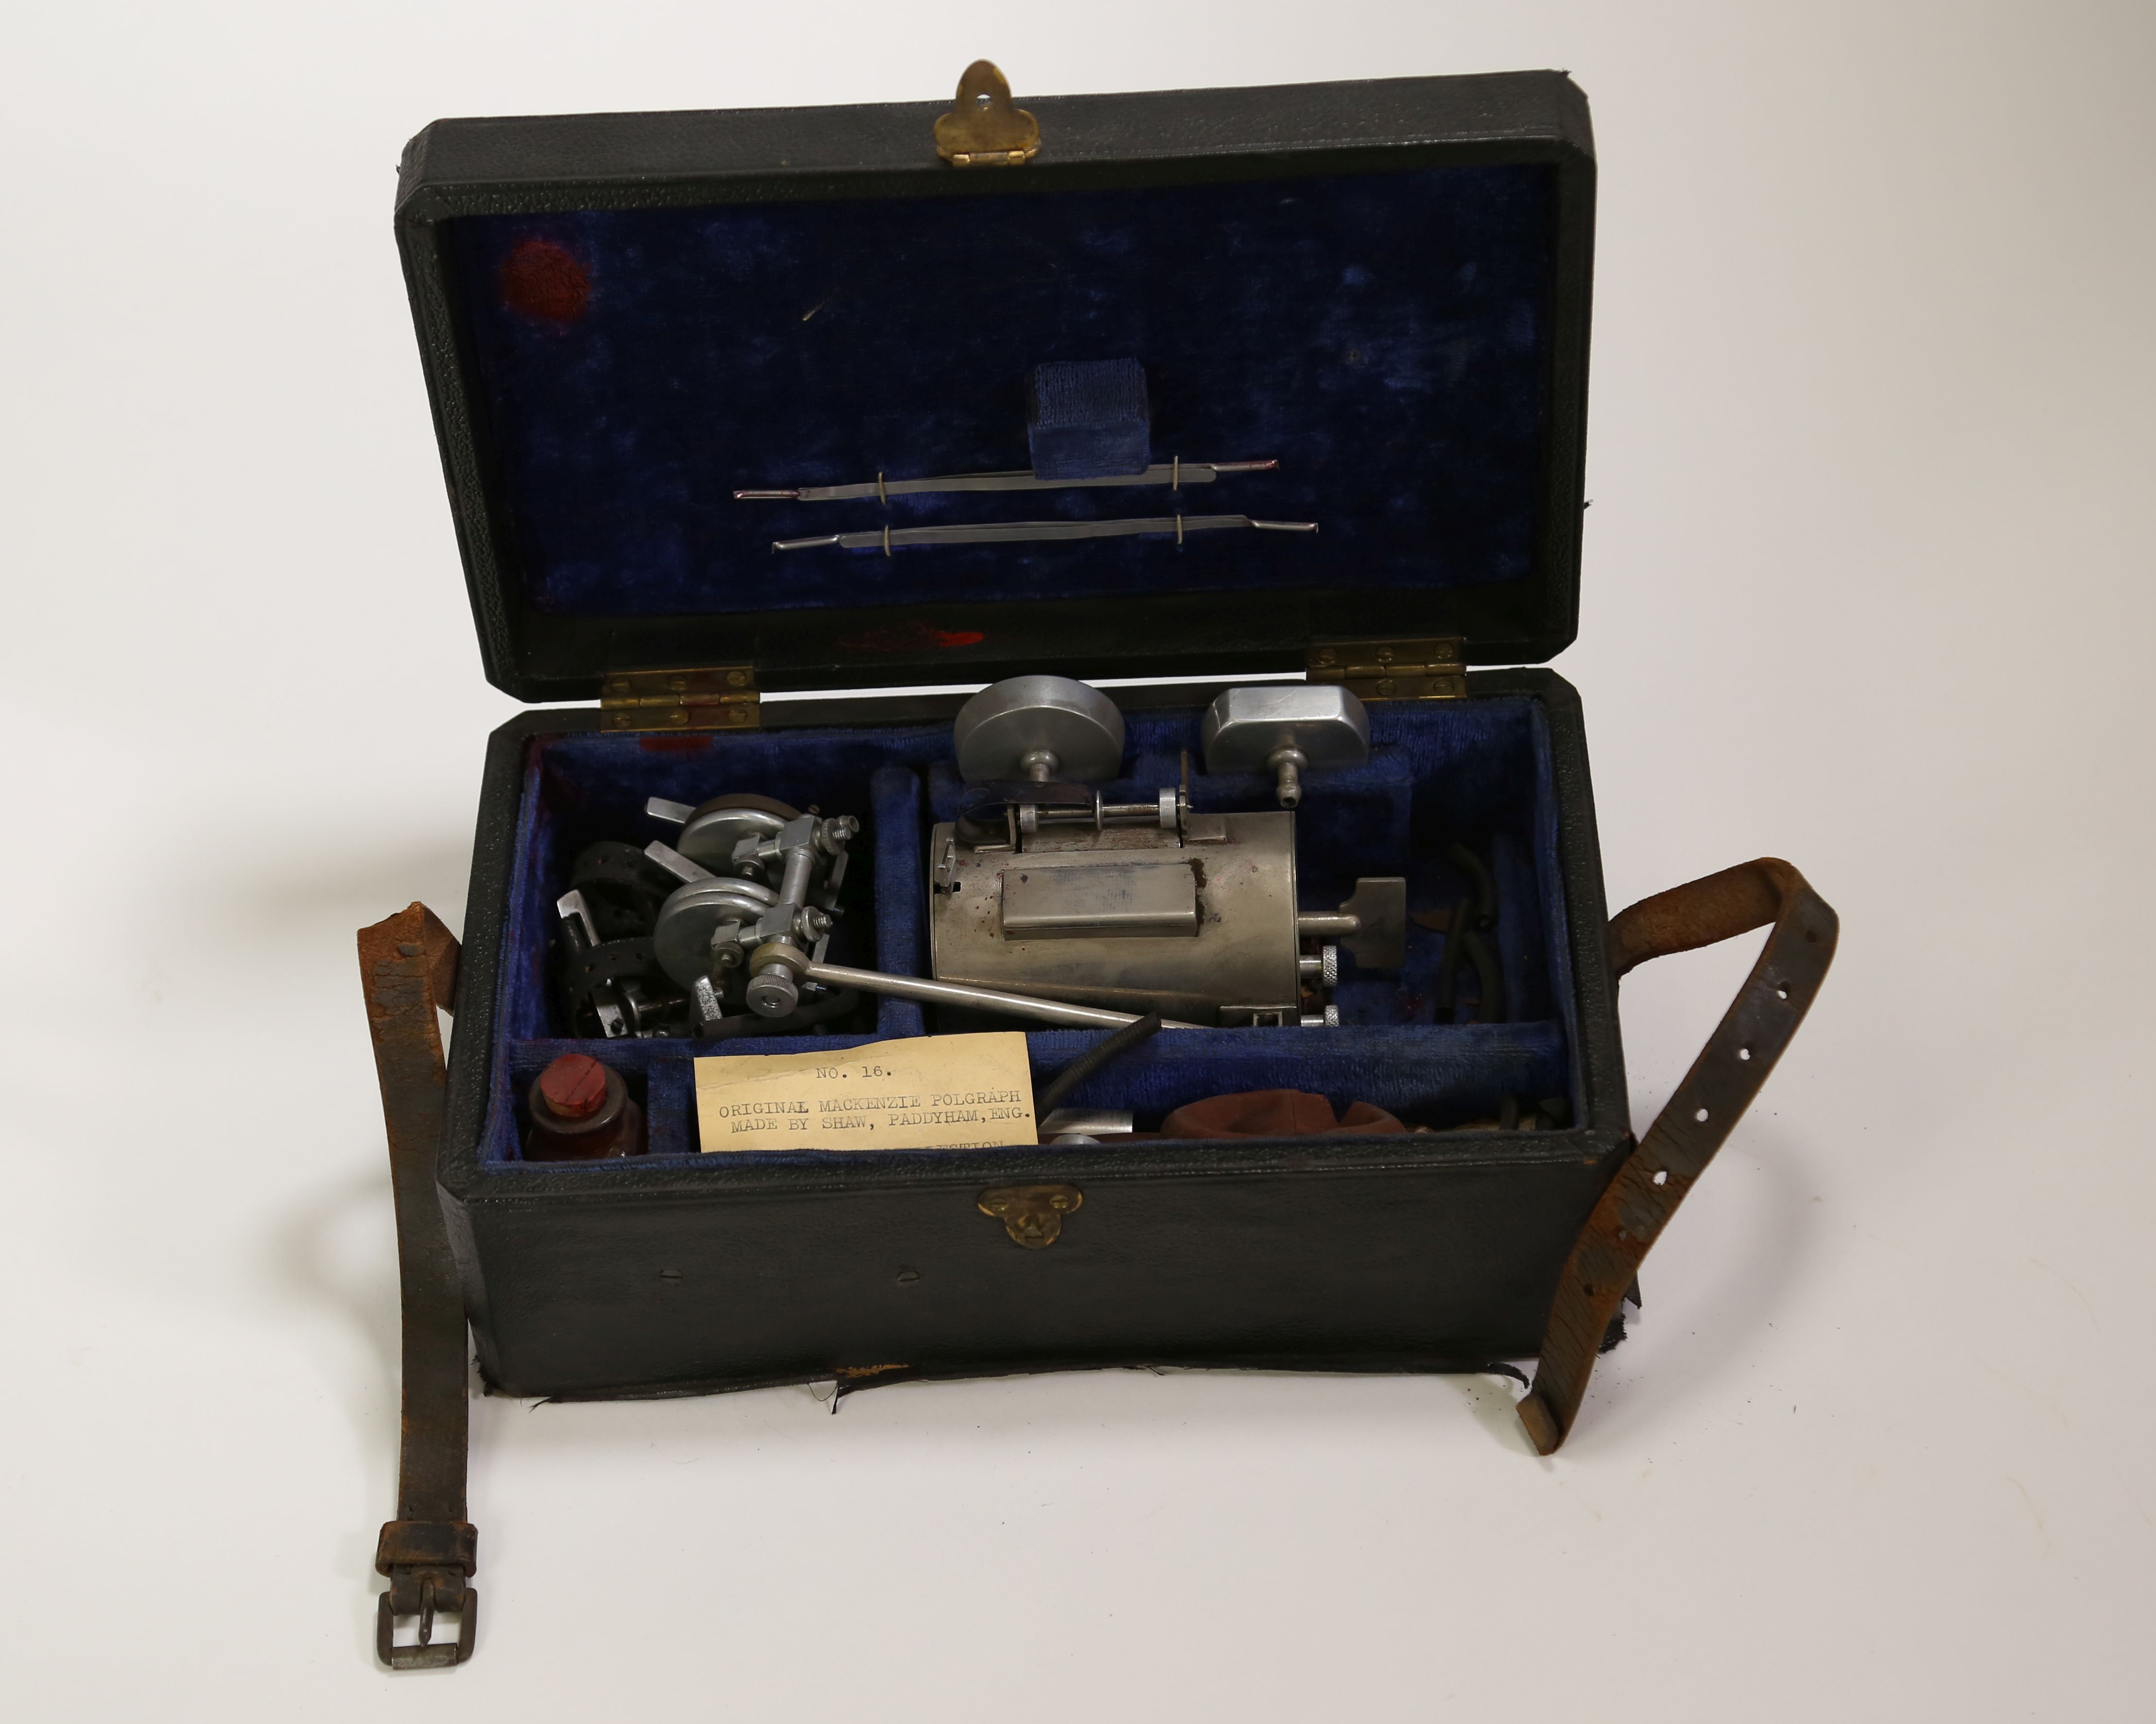 Disassembled Mackenzie Polygraph machine. The case containing the object is open to show the parts of the object, which are not assembled.